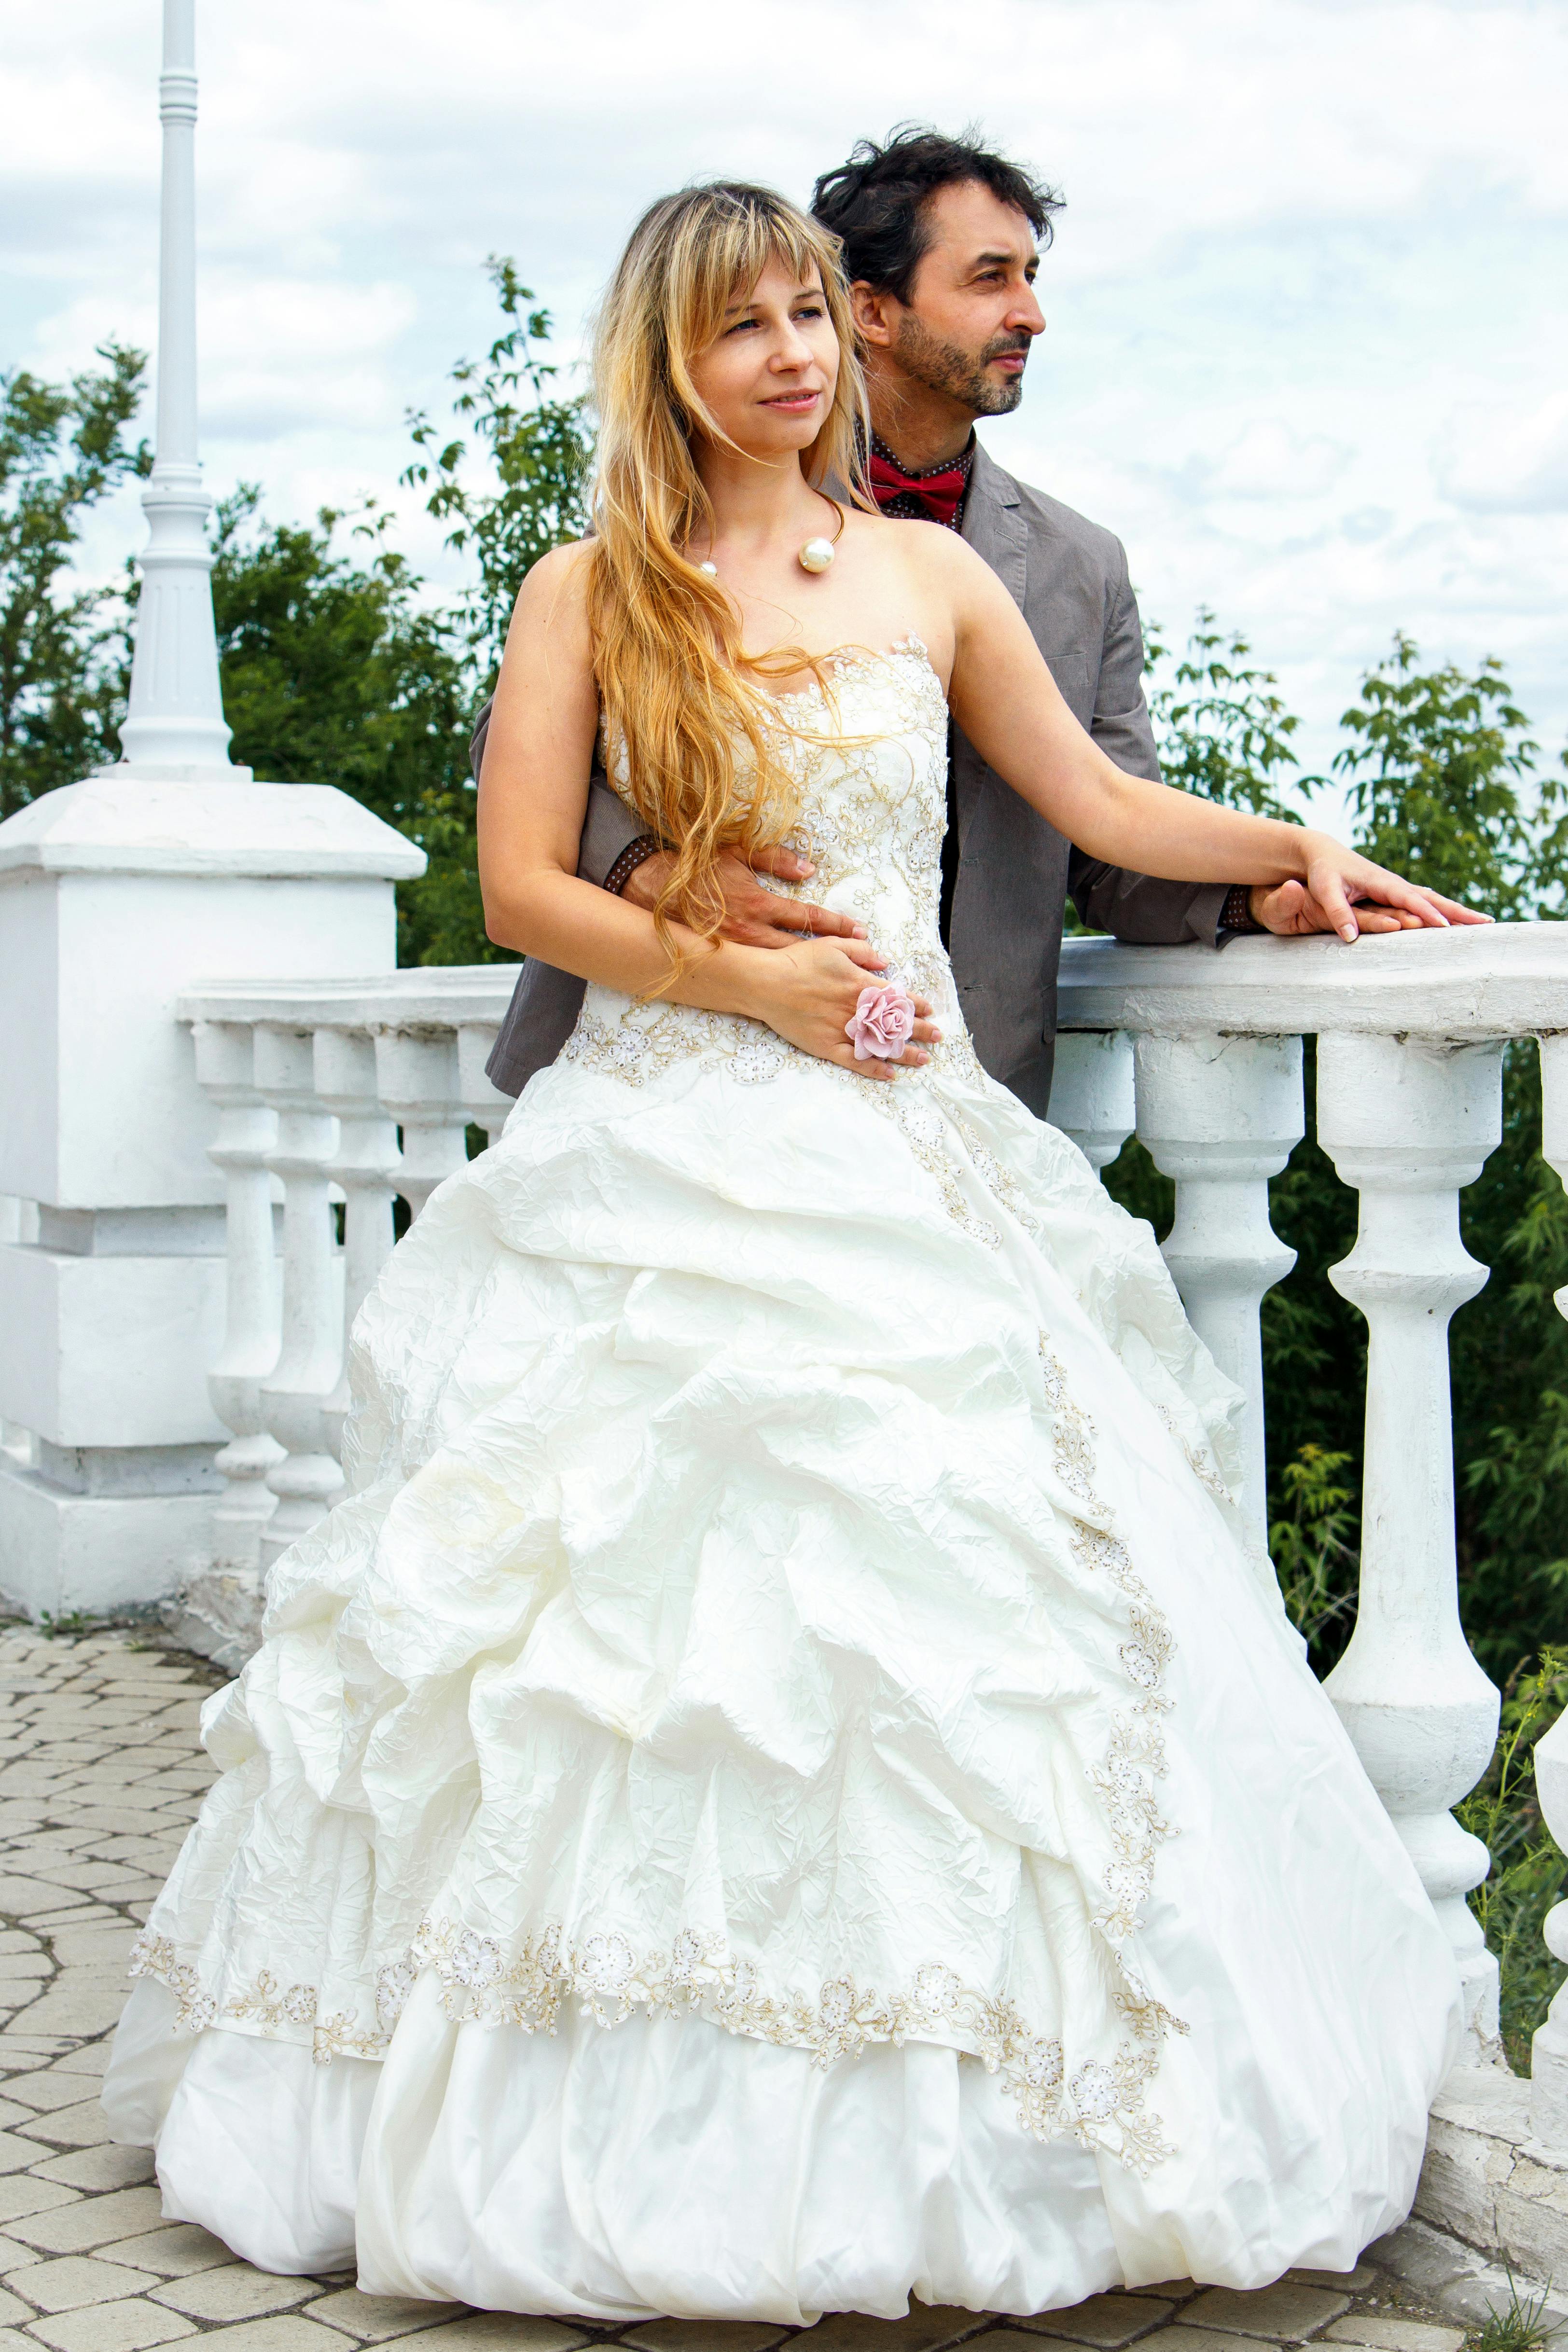 Woman Wearing Pink Wedding Gown Standing Next to Man 